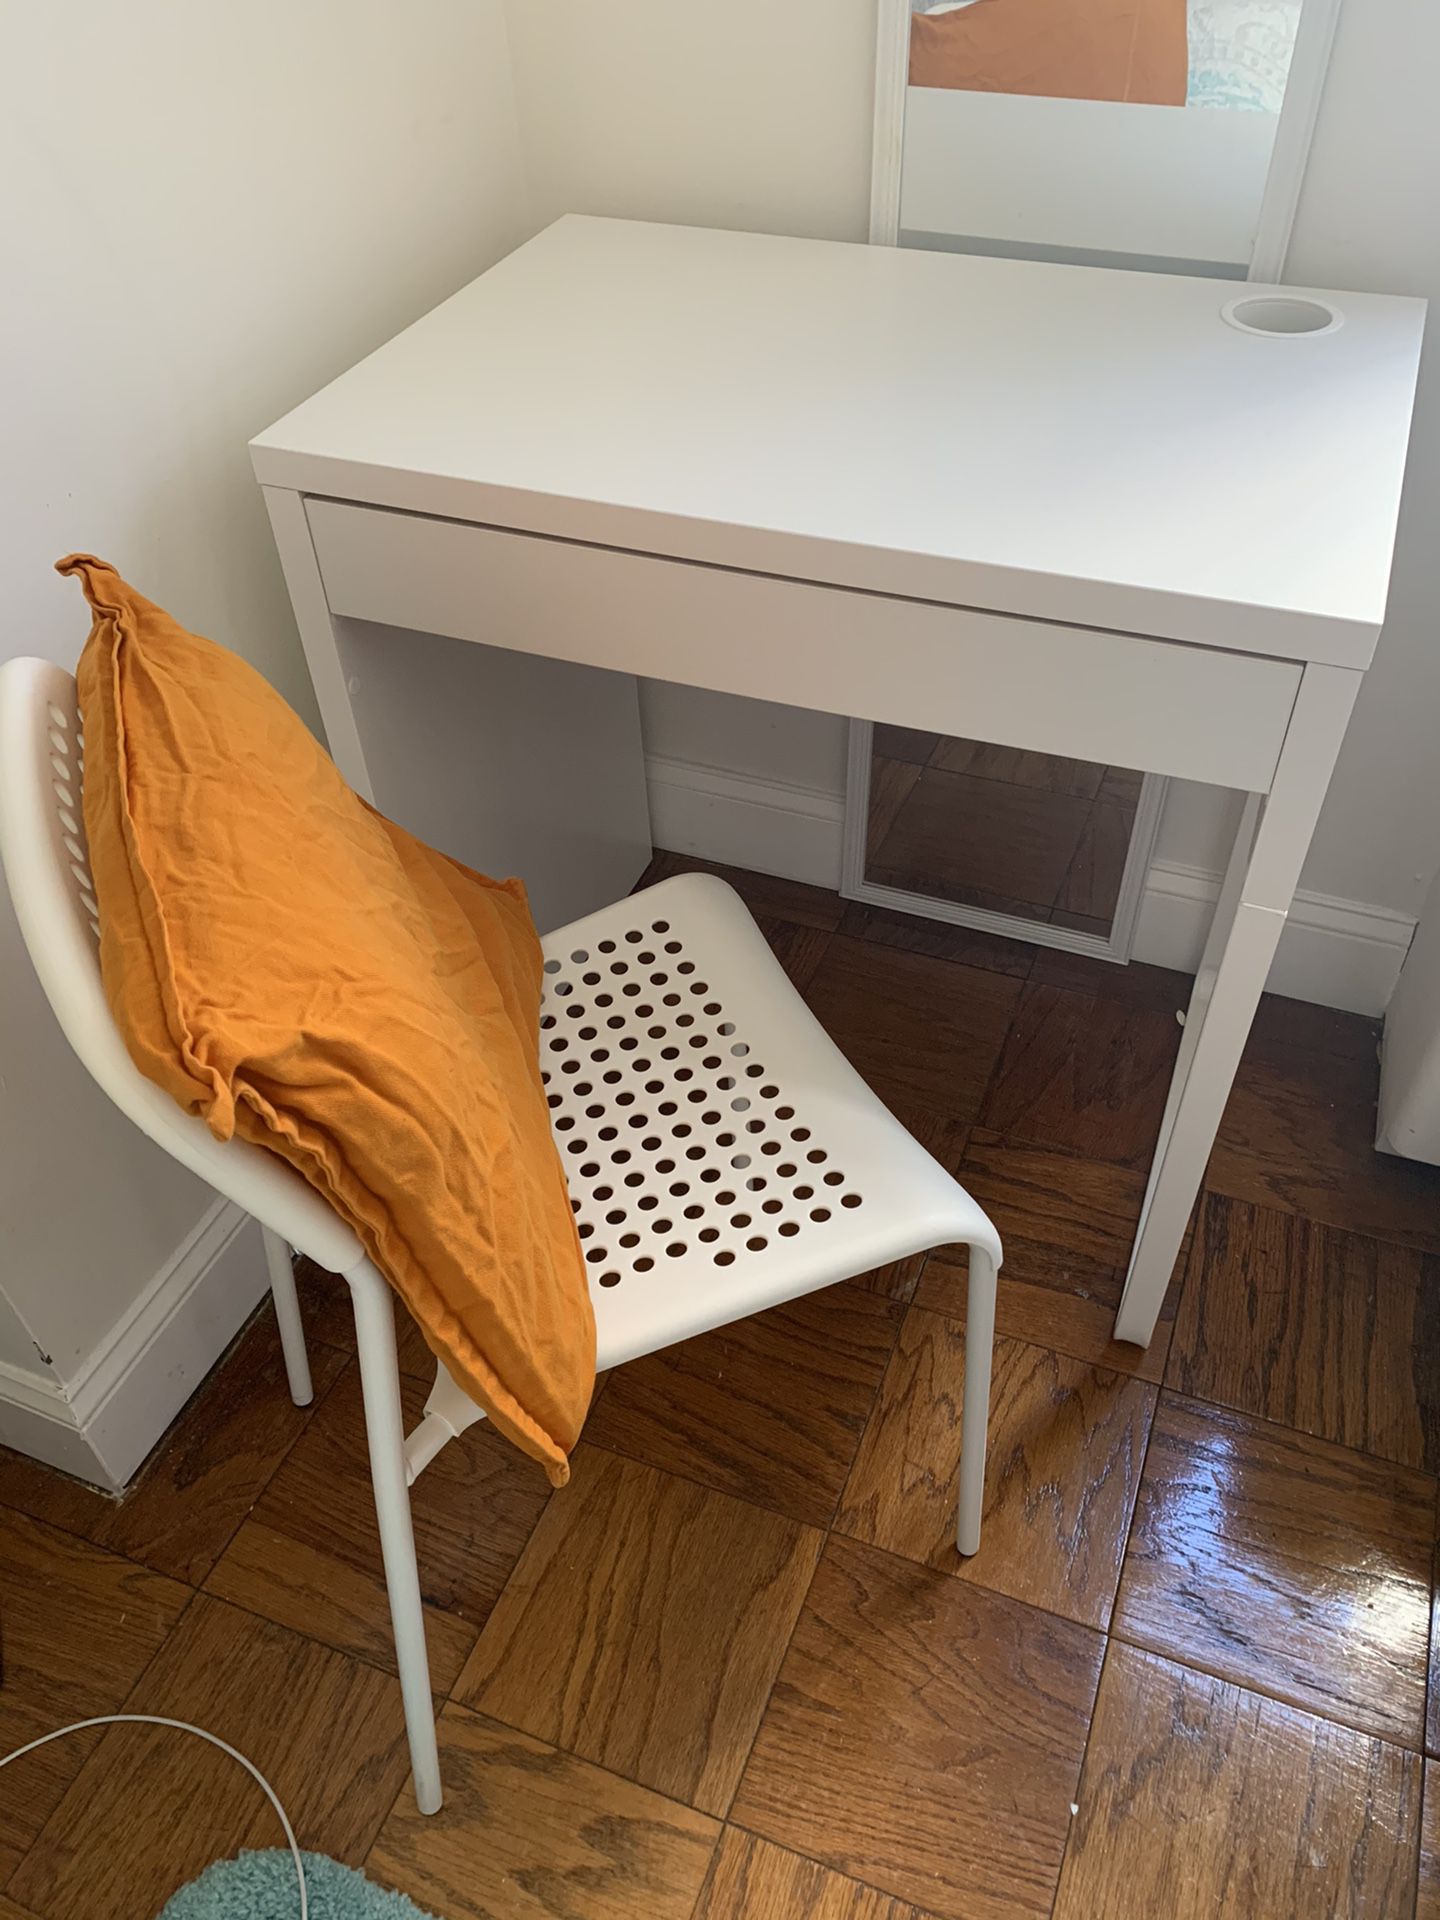 IKEA White desk with chair and cushion